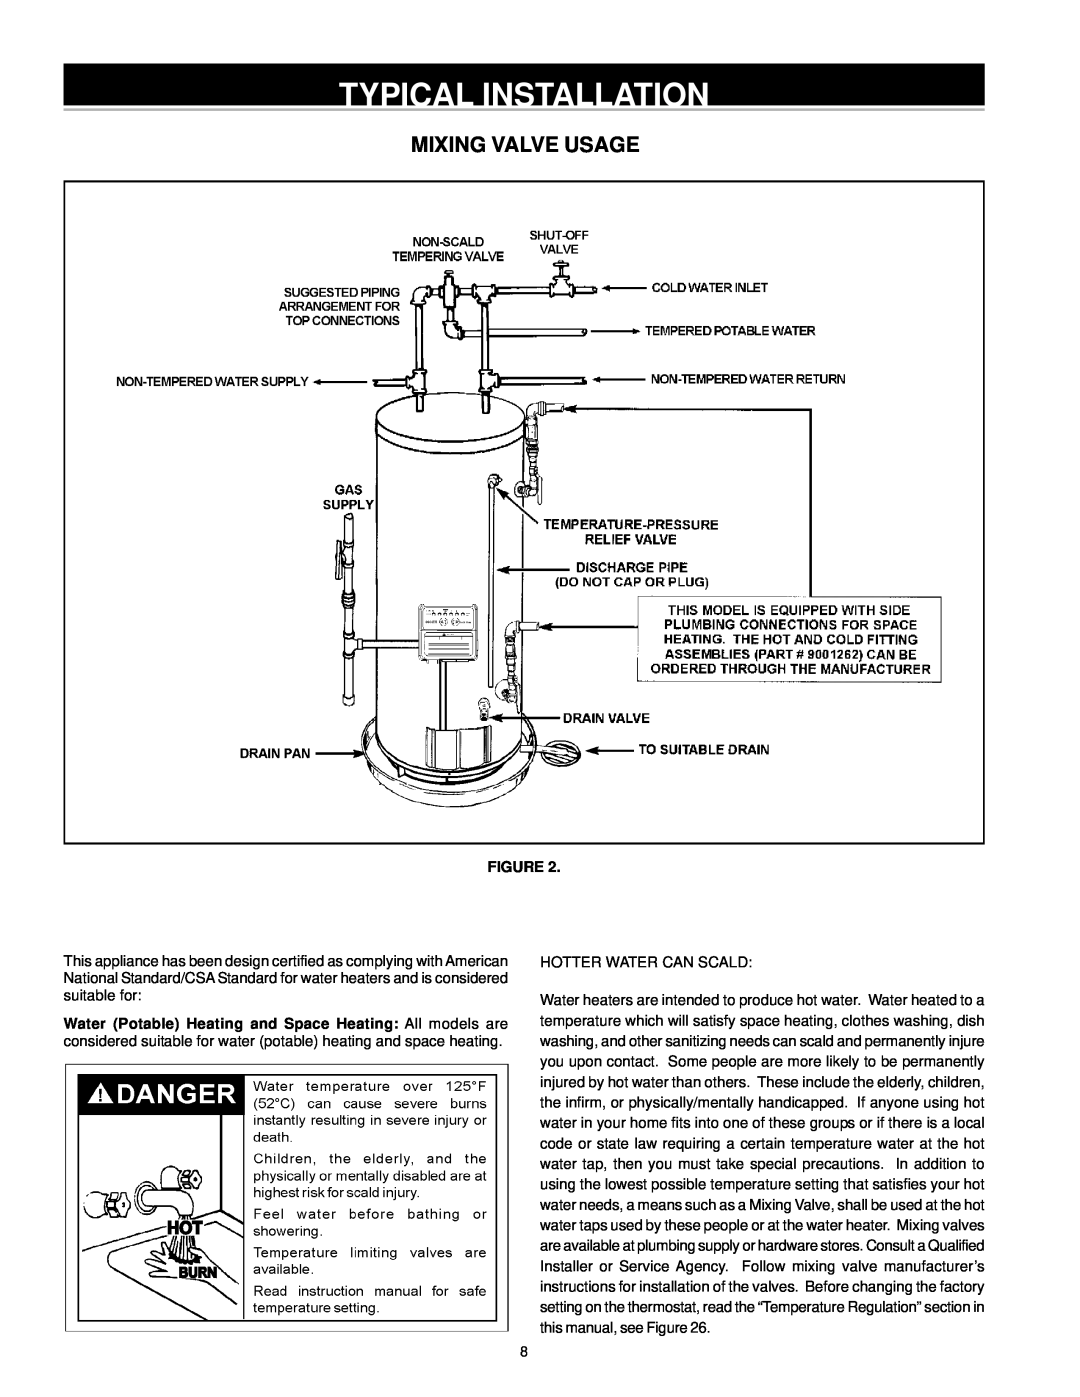 A.O. Smith ARGSS02708 instruction manual Mixing Valve Usage, Typical Installation 